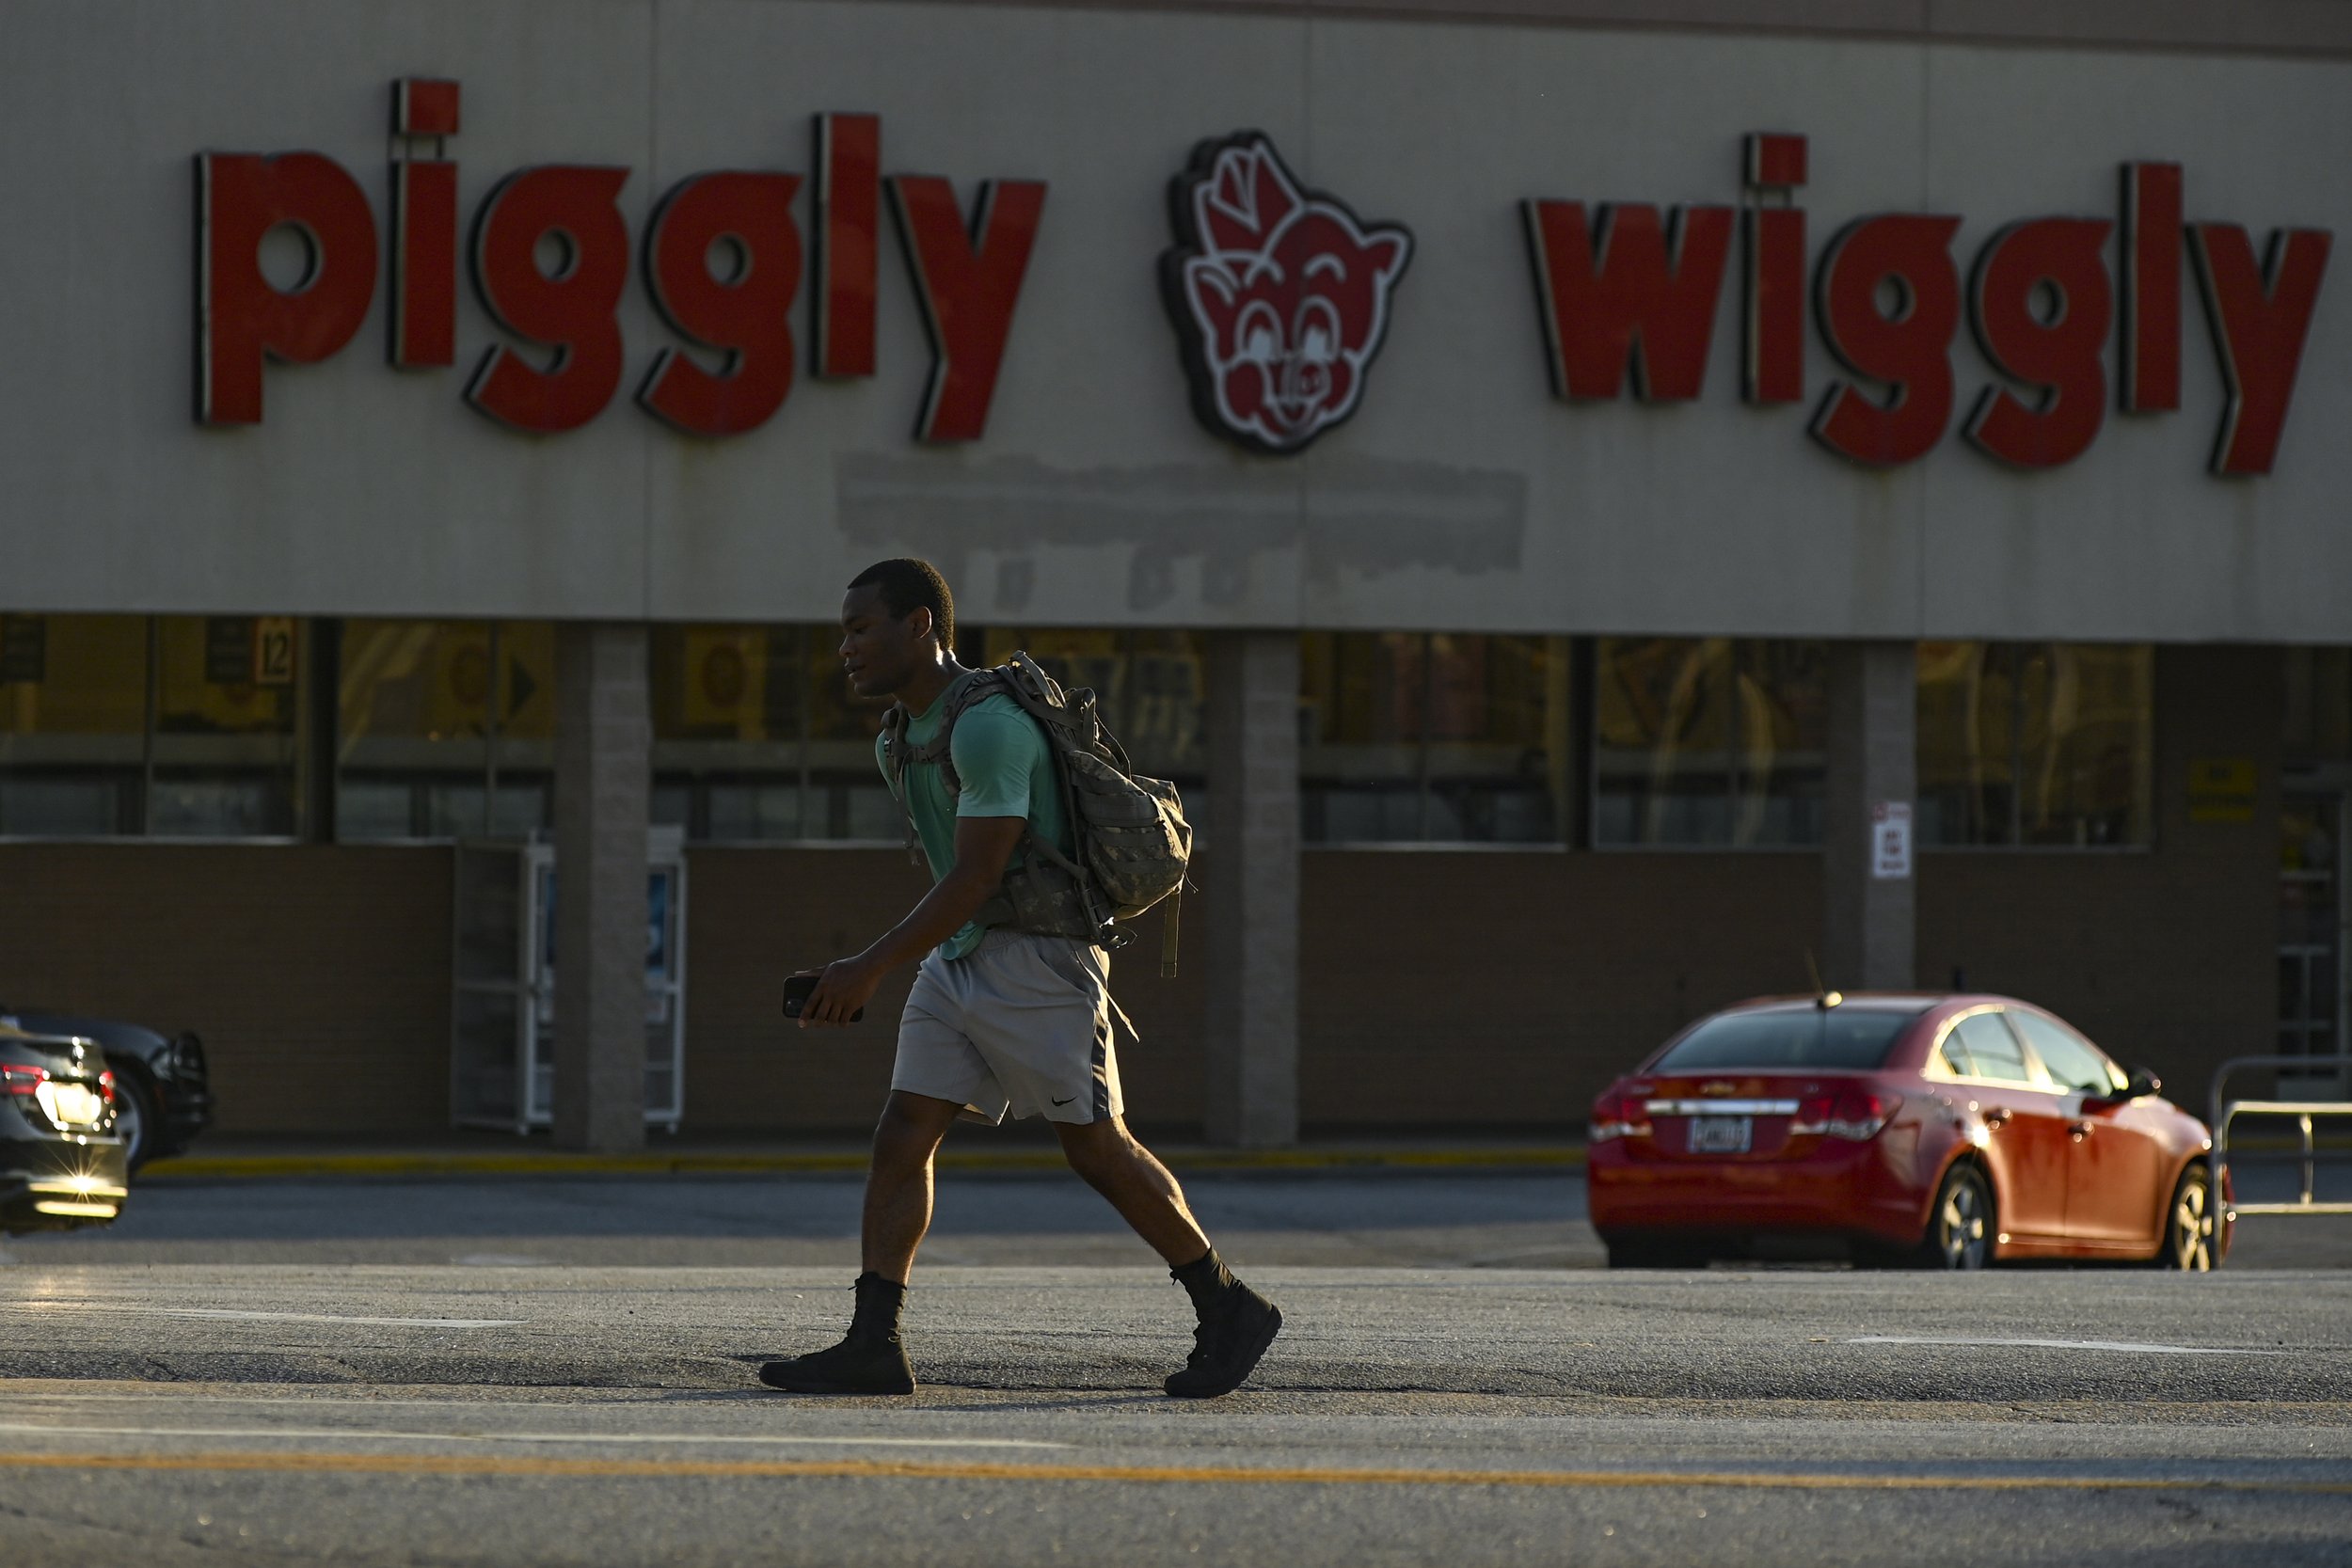  Scenes outside the Piggly Wiggly, Oct. 9, 2021 in Columbus, Ga. where Cedric Jamal Mifflin once worked prior to his death in 2017. Mifflin was shot at 15 times by Michael Seavers, a Phenix City police officer, killing Mifflin, a young unarmed black 